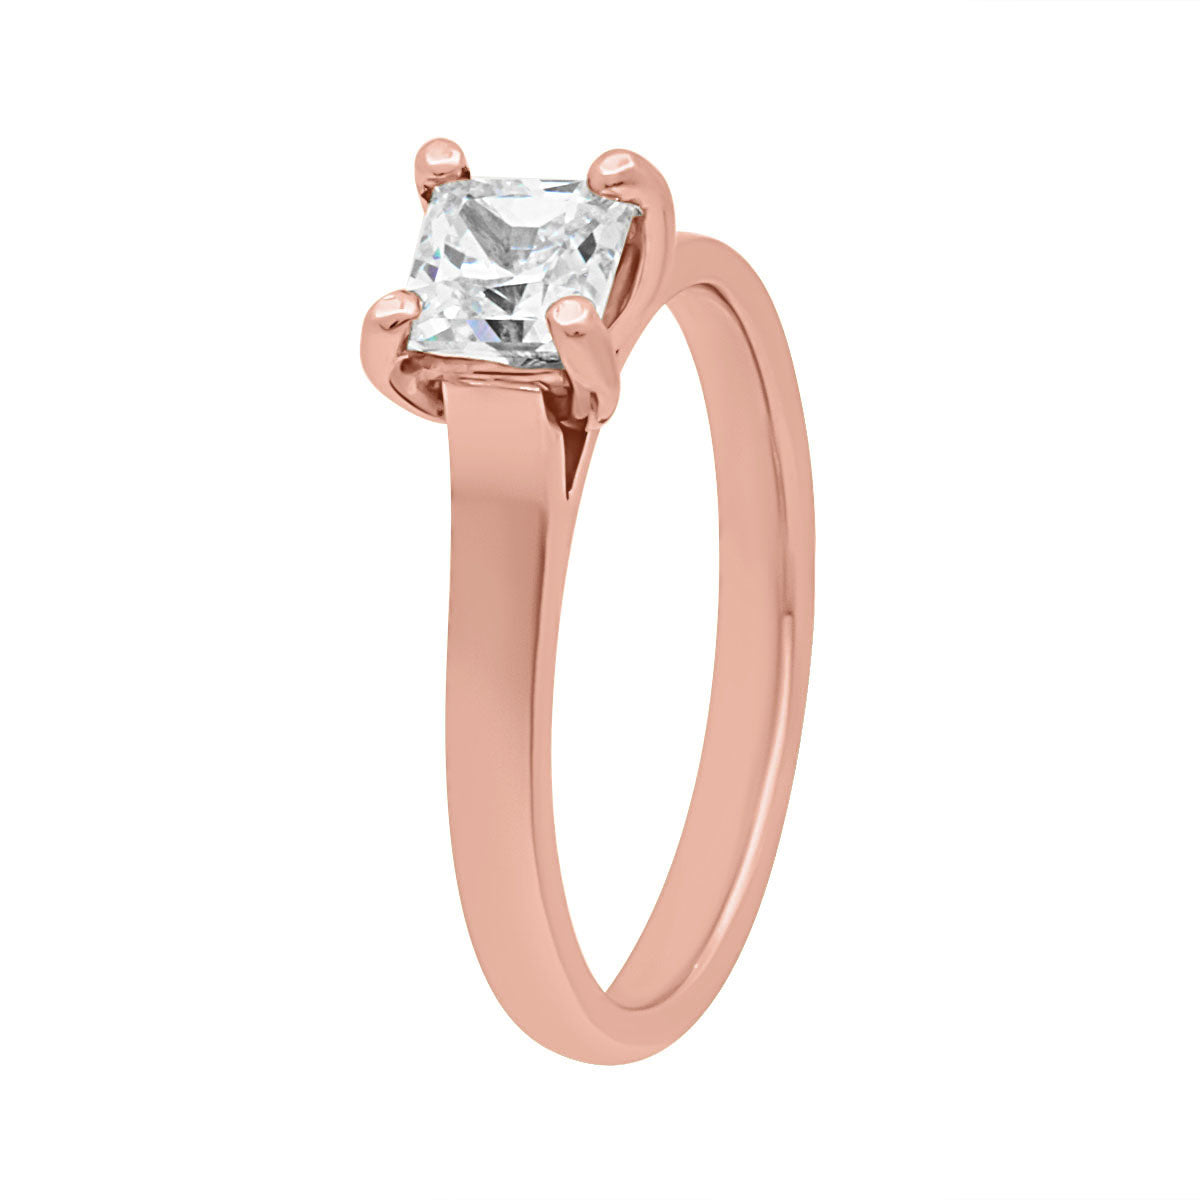 Princess cut engagement ring in rose gold standing upright at an angle